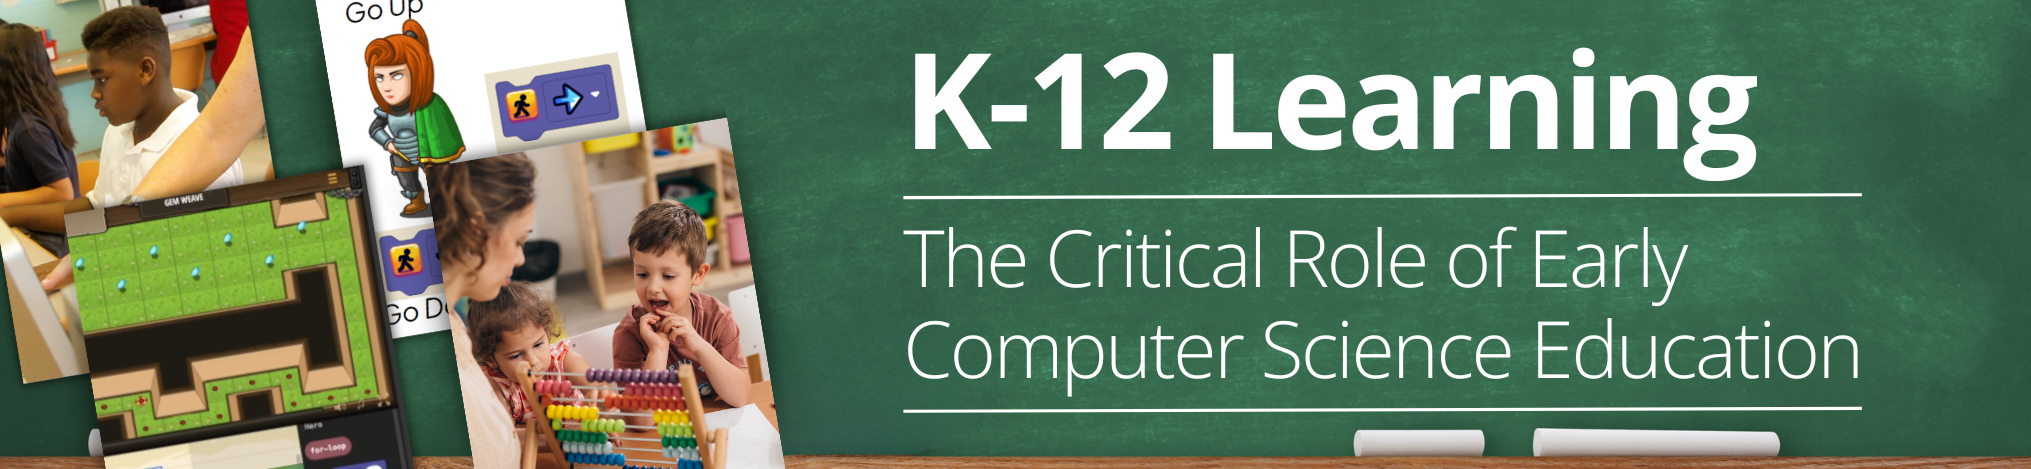 The Critical Role of Early Computer Science Education in K-12 Learning